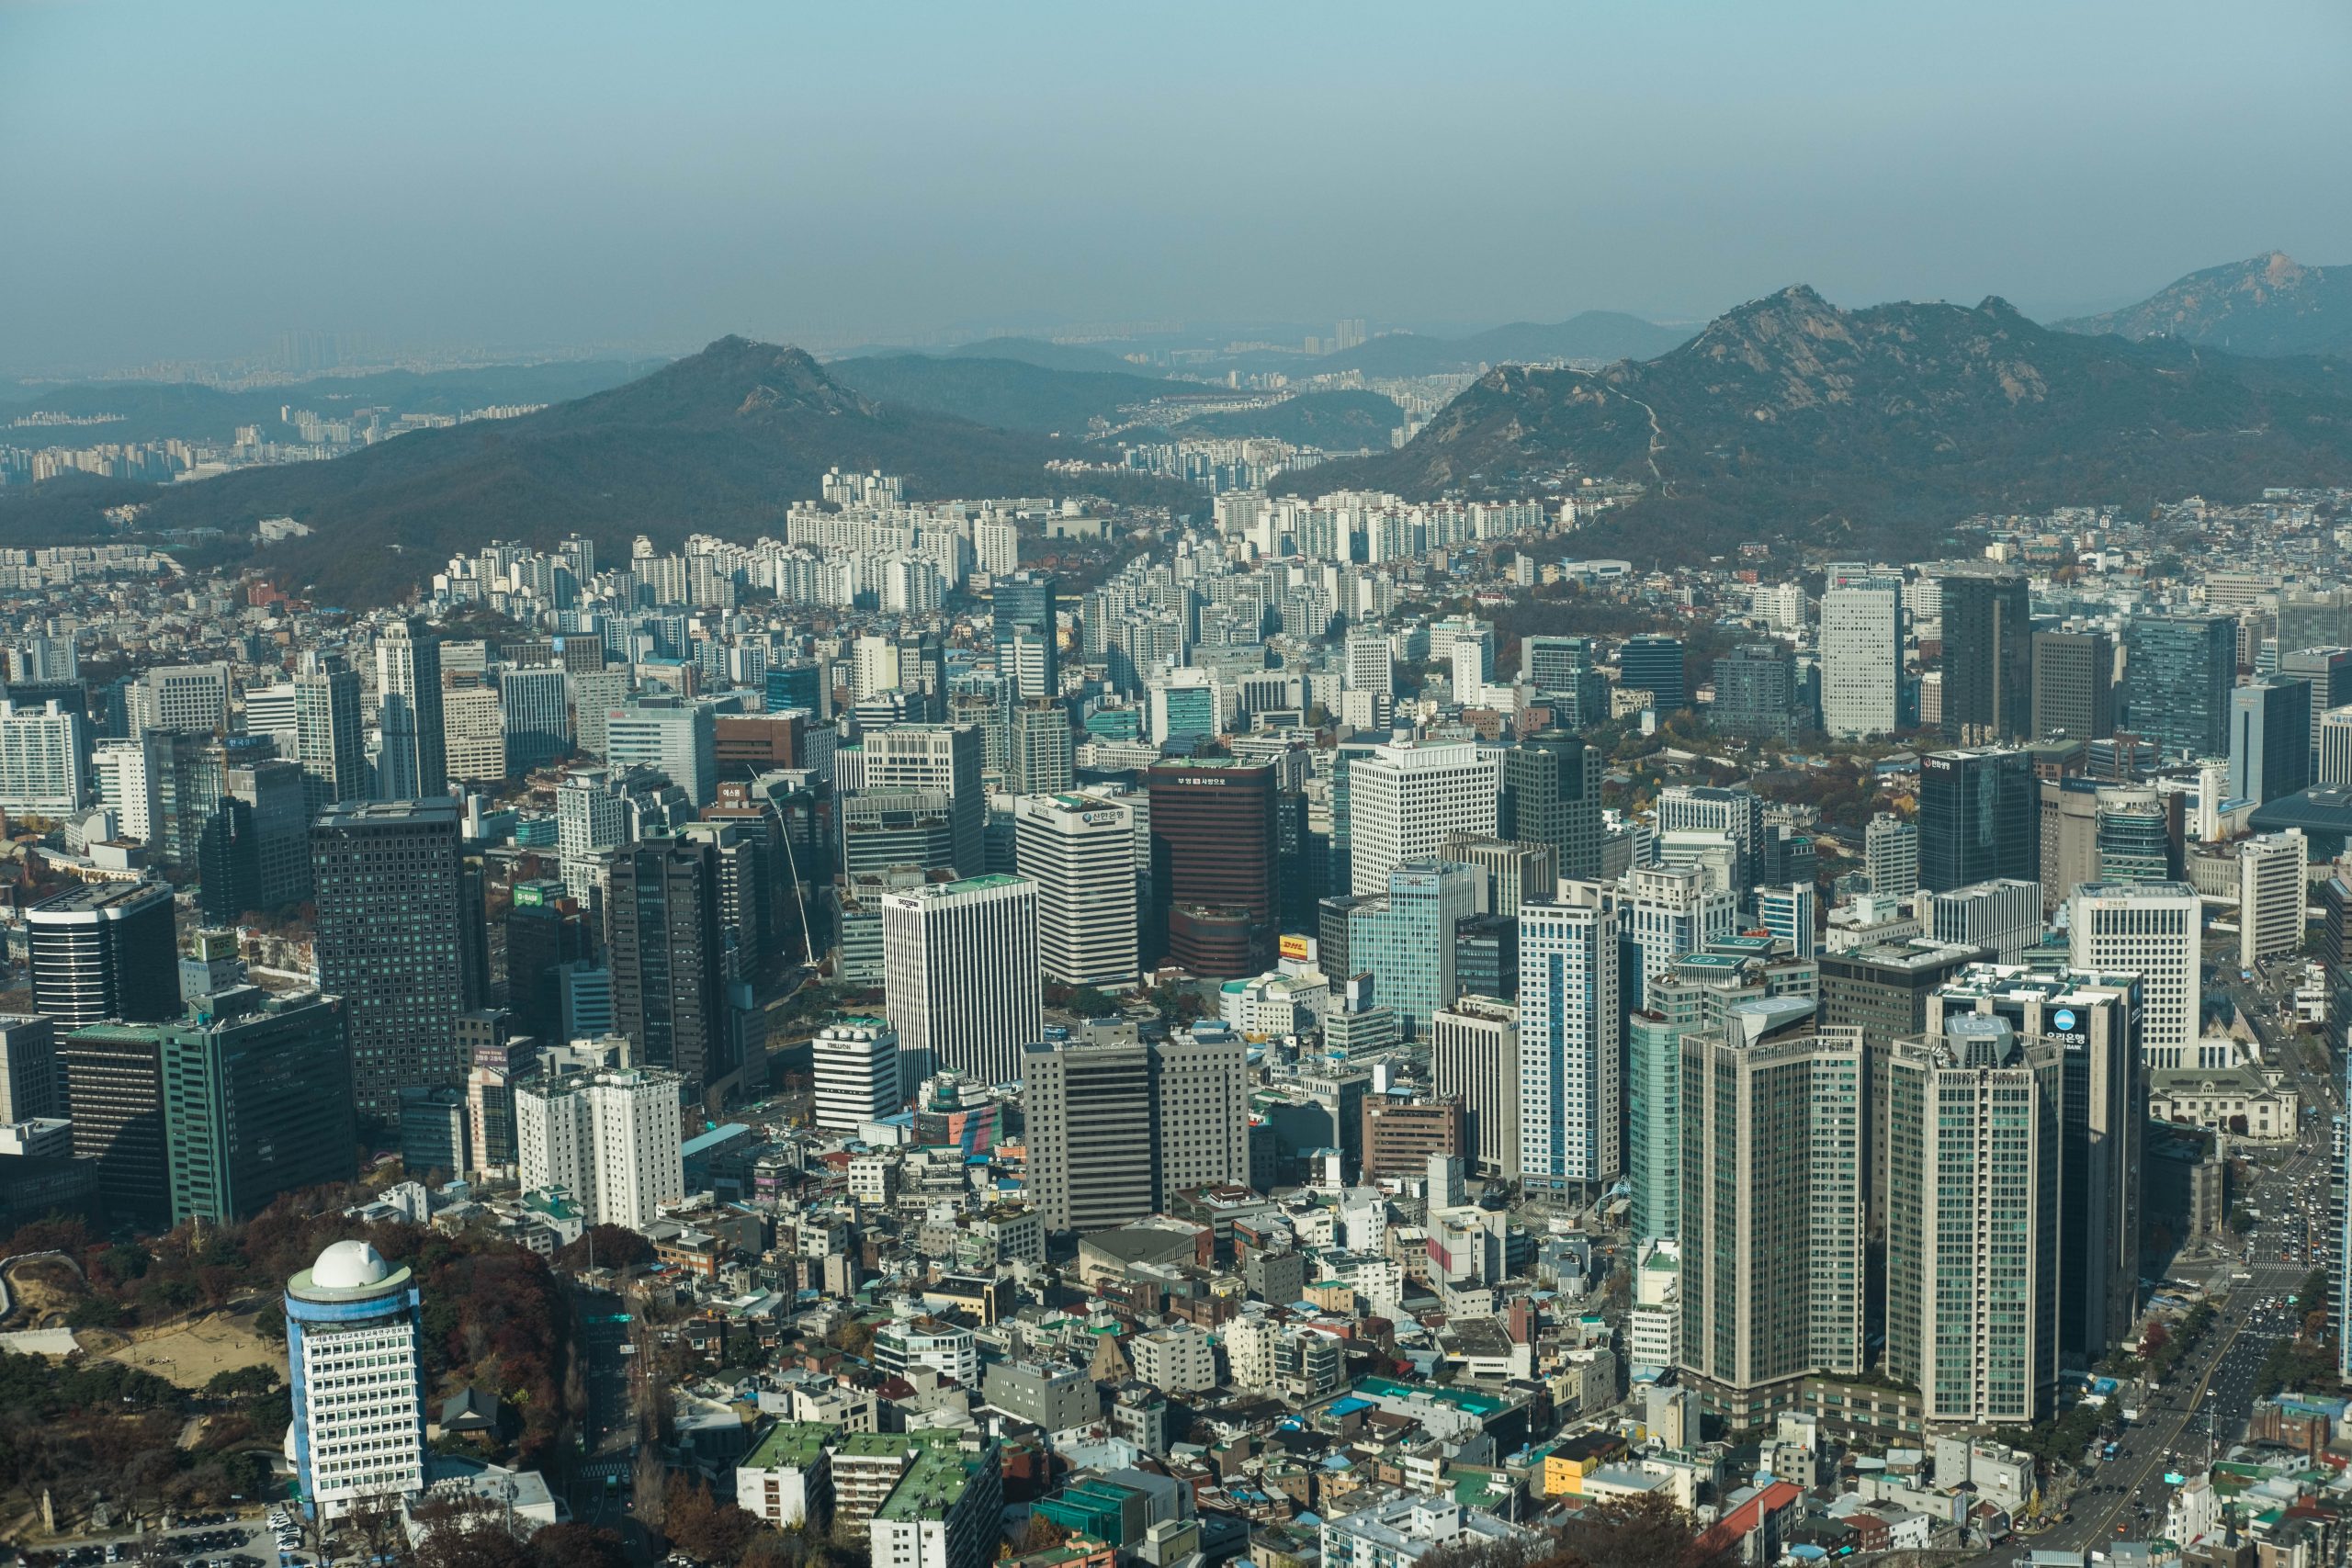 Seoul as seen from the Seoul N Tower